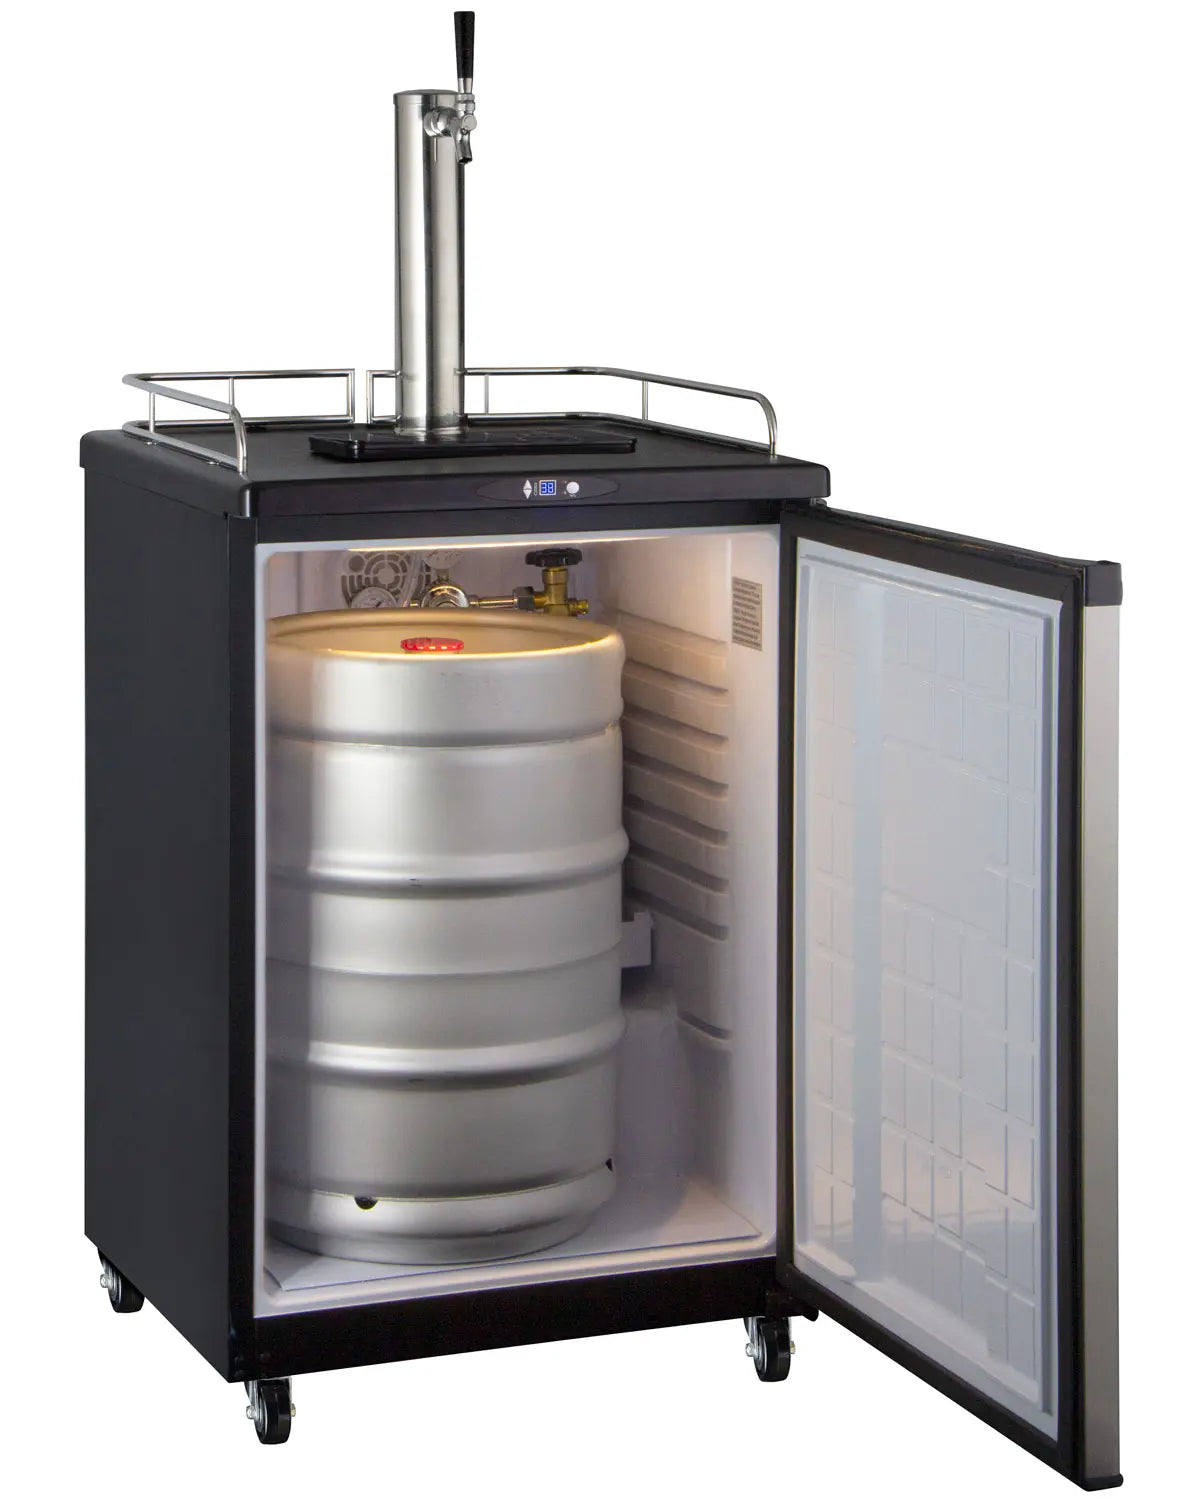 Kegco 24" Wide Single Tap Commercial/Residential Kegerator - ICZ163S-1NK